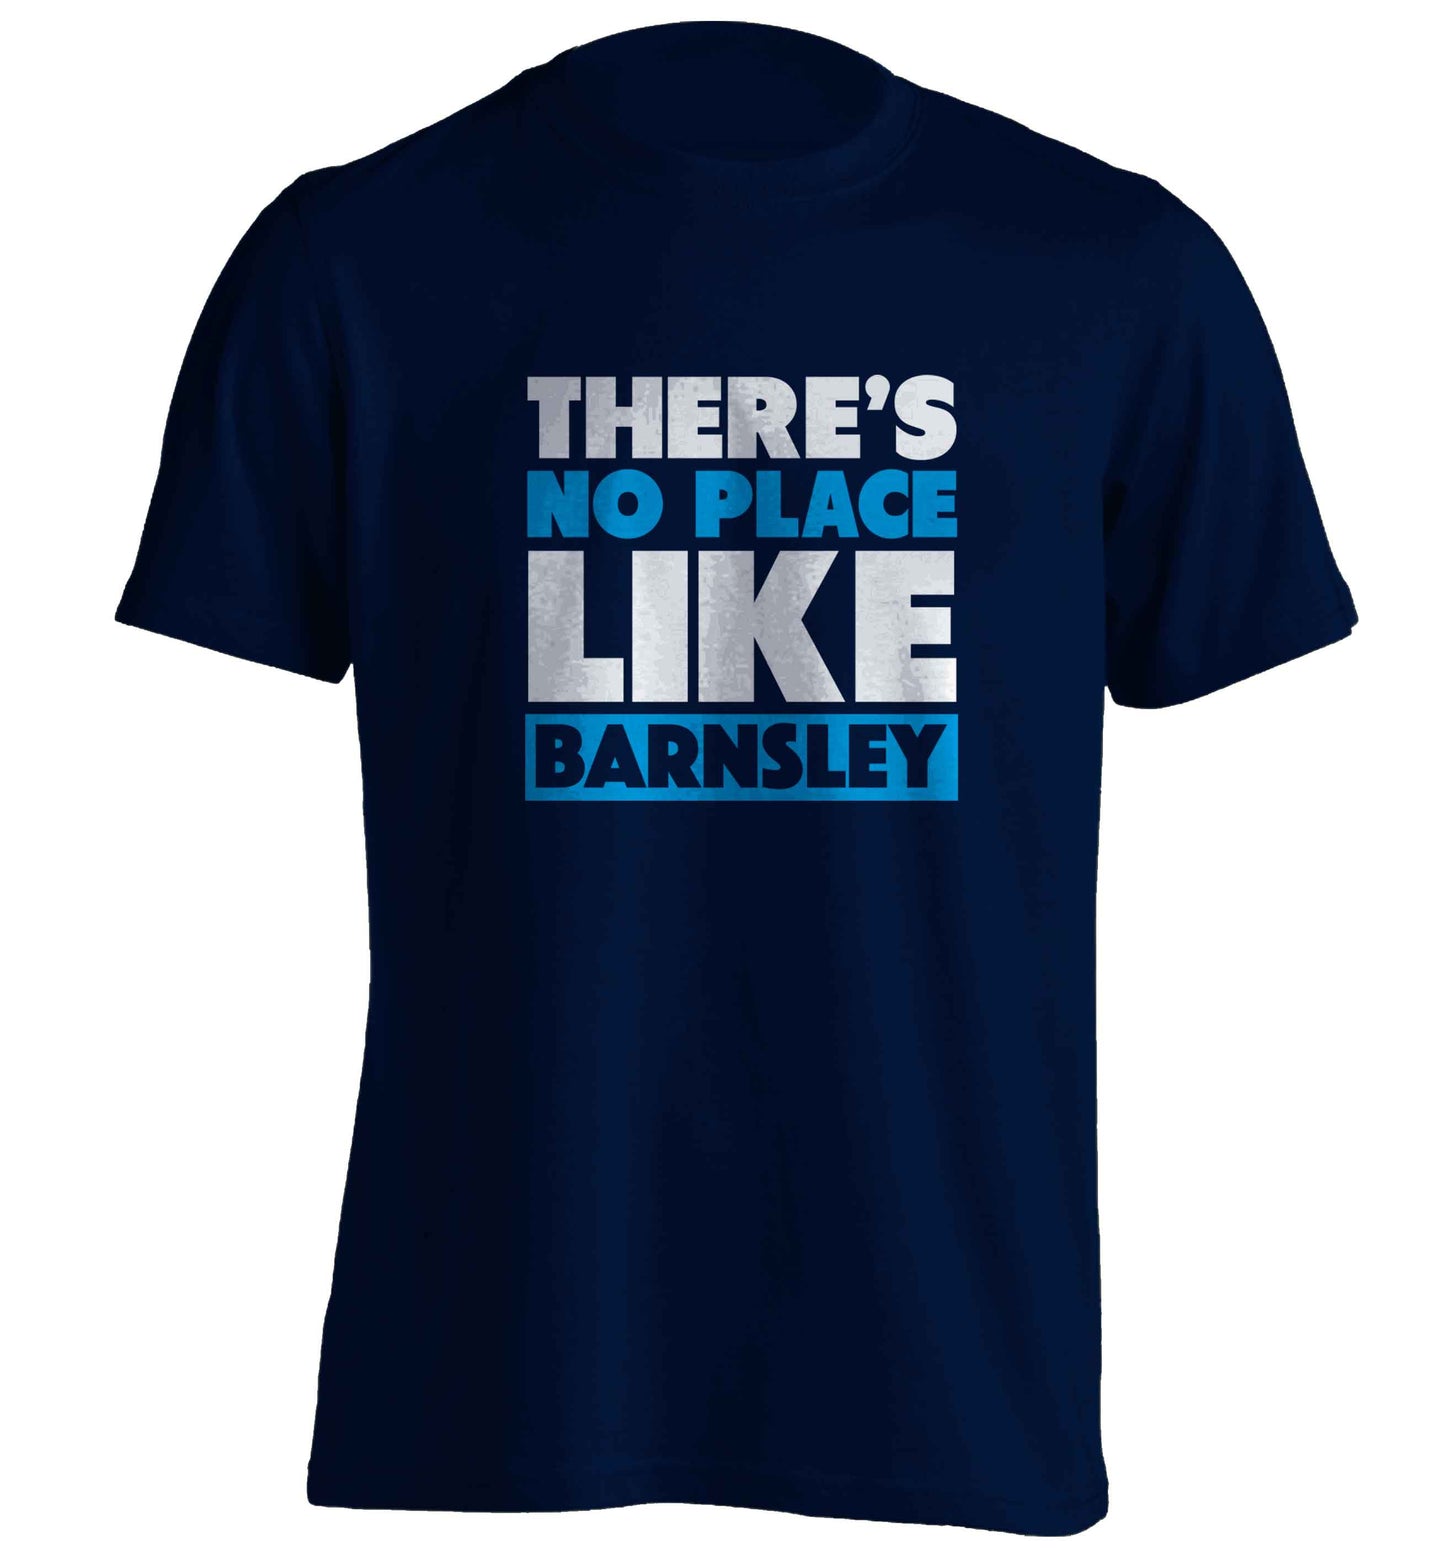 There's No Place Like Barnsley adults unisex navy Tshirt 2XL